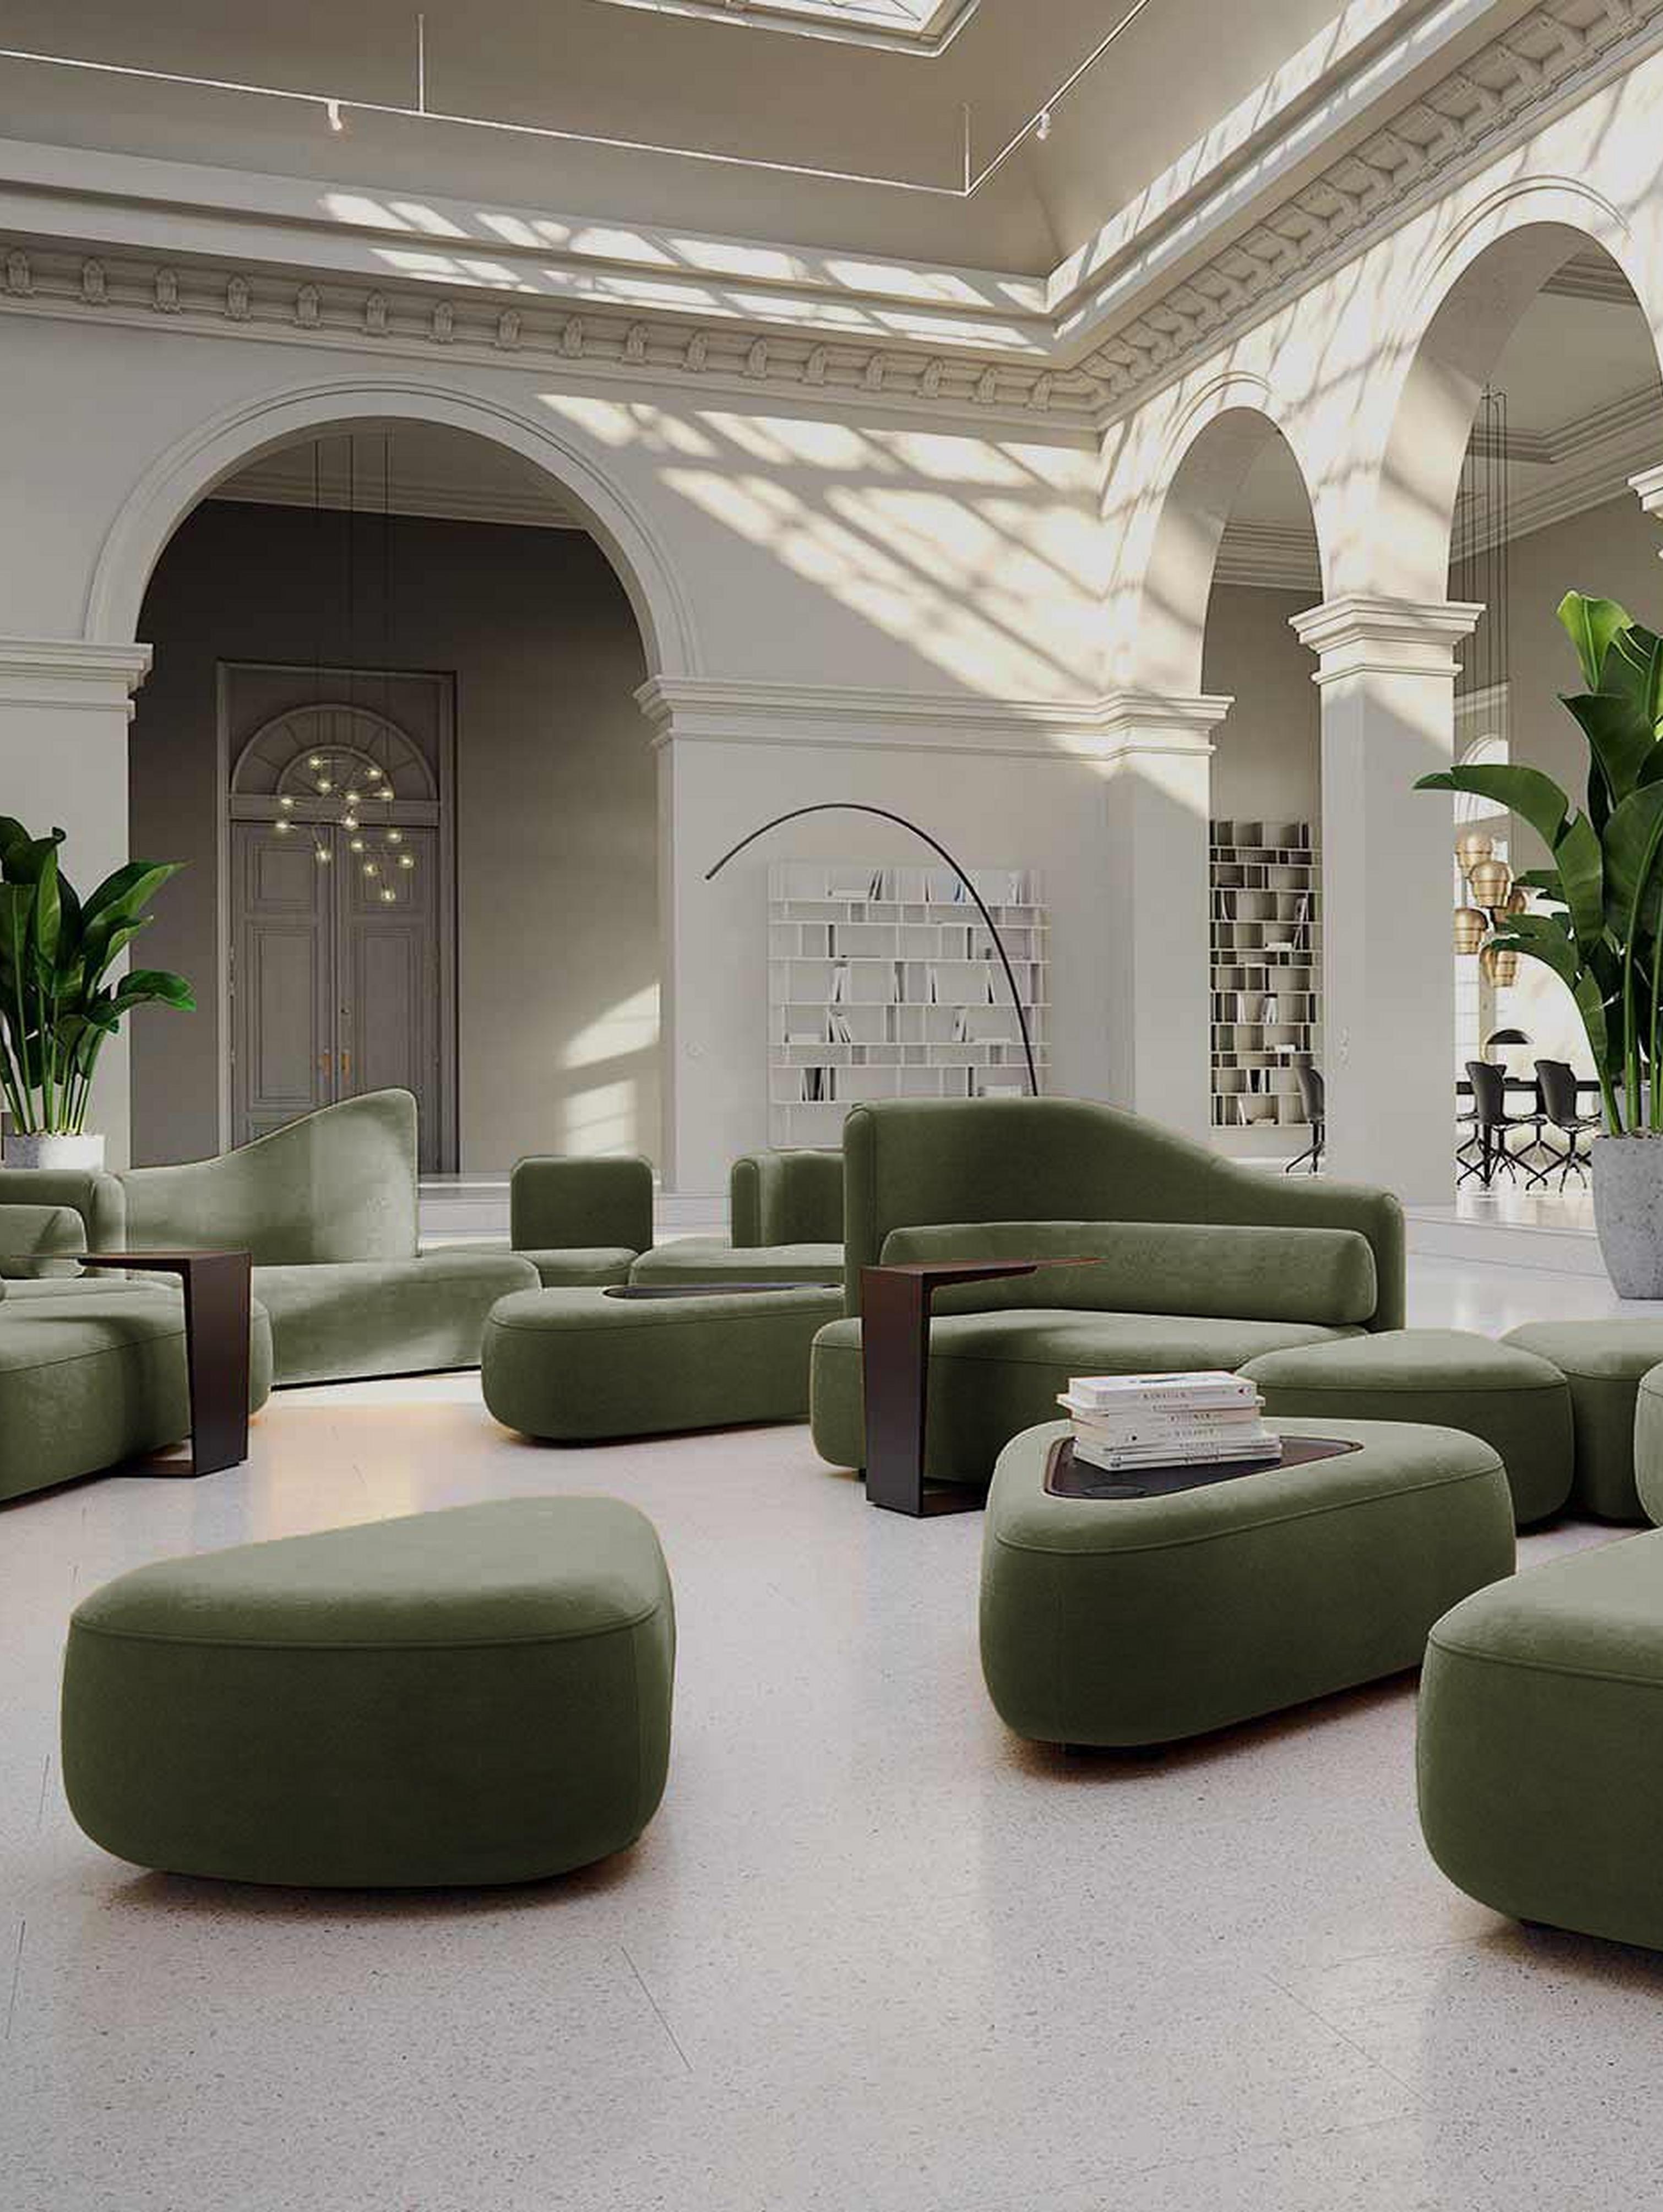 Spacious room with green sofas, white columns, arches, and potted plants in a bright setting.